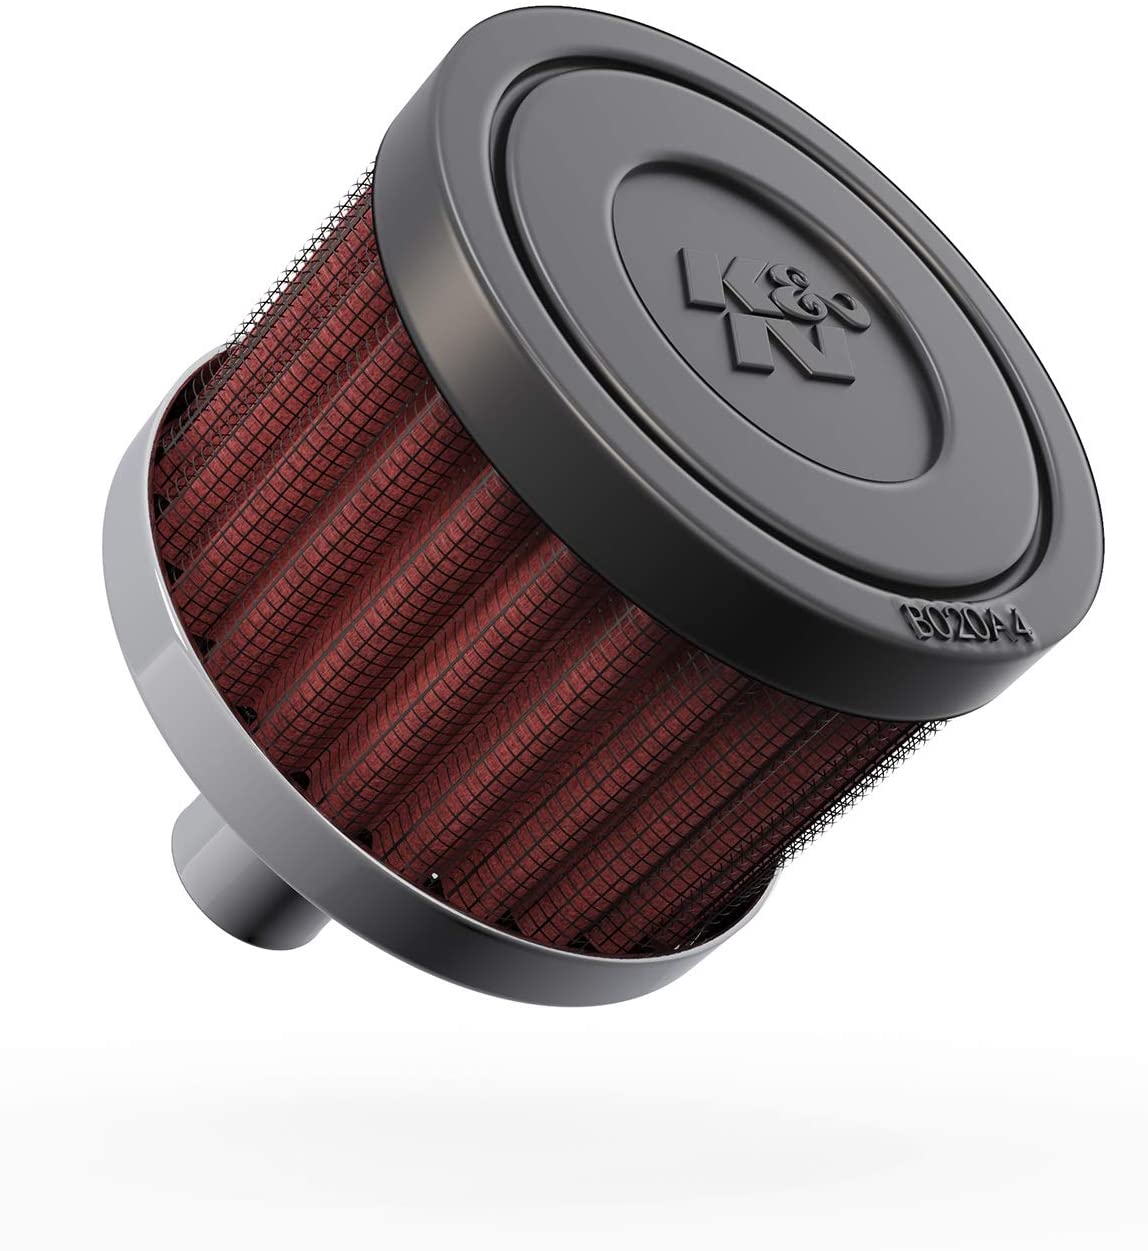 K&N Vent Air Filter/ Breather: High Performance, Premium, Washable, Replacement Engine Filter: Flange Diameter: 0.5 In, Filter Height: 1.5 In, Flange Length: 0.875 In, Shape: Breather, 62-1010